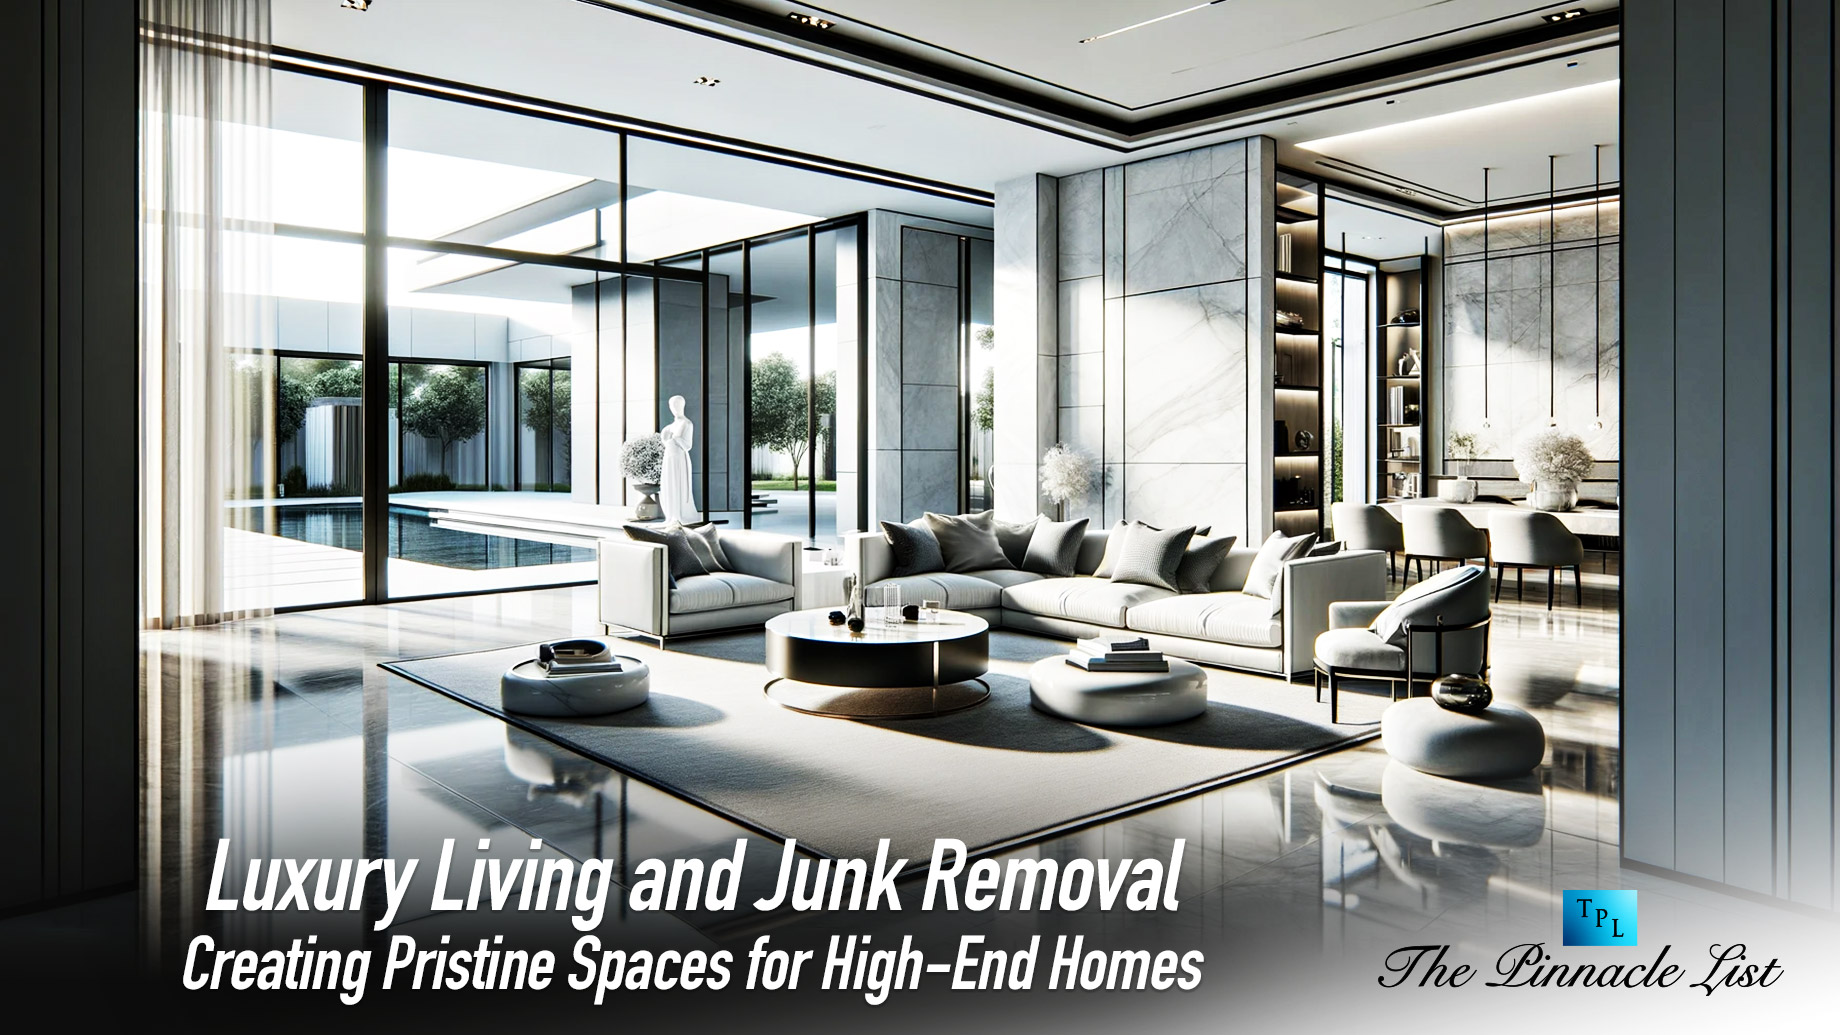 Luxury Living and Junk Removal: Creating Pristine Spaces for High-End Homes